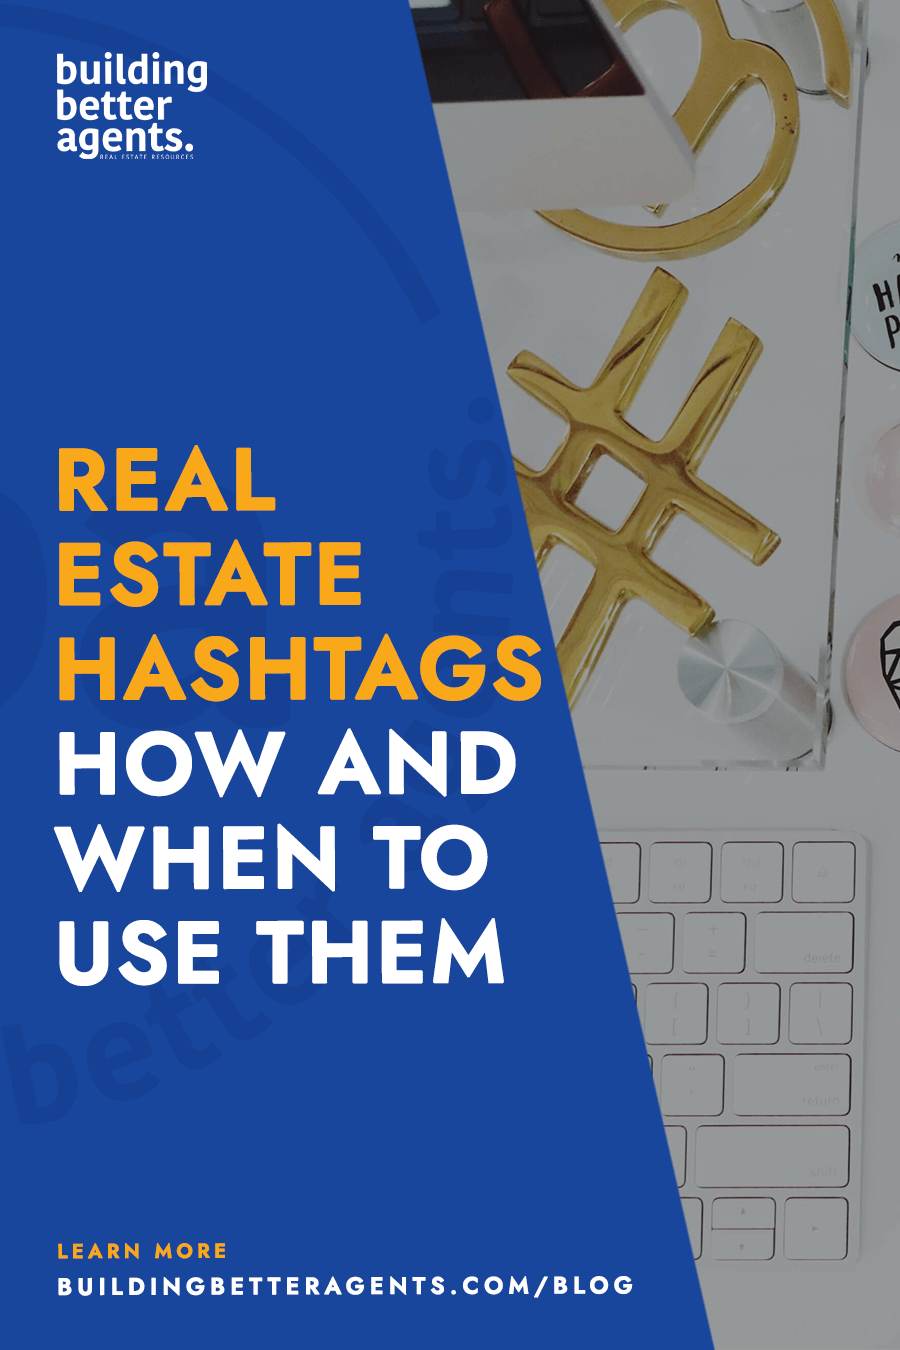 Why You Should Use Hashtags in Real Estate Marketing